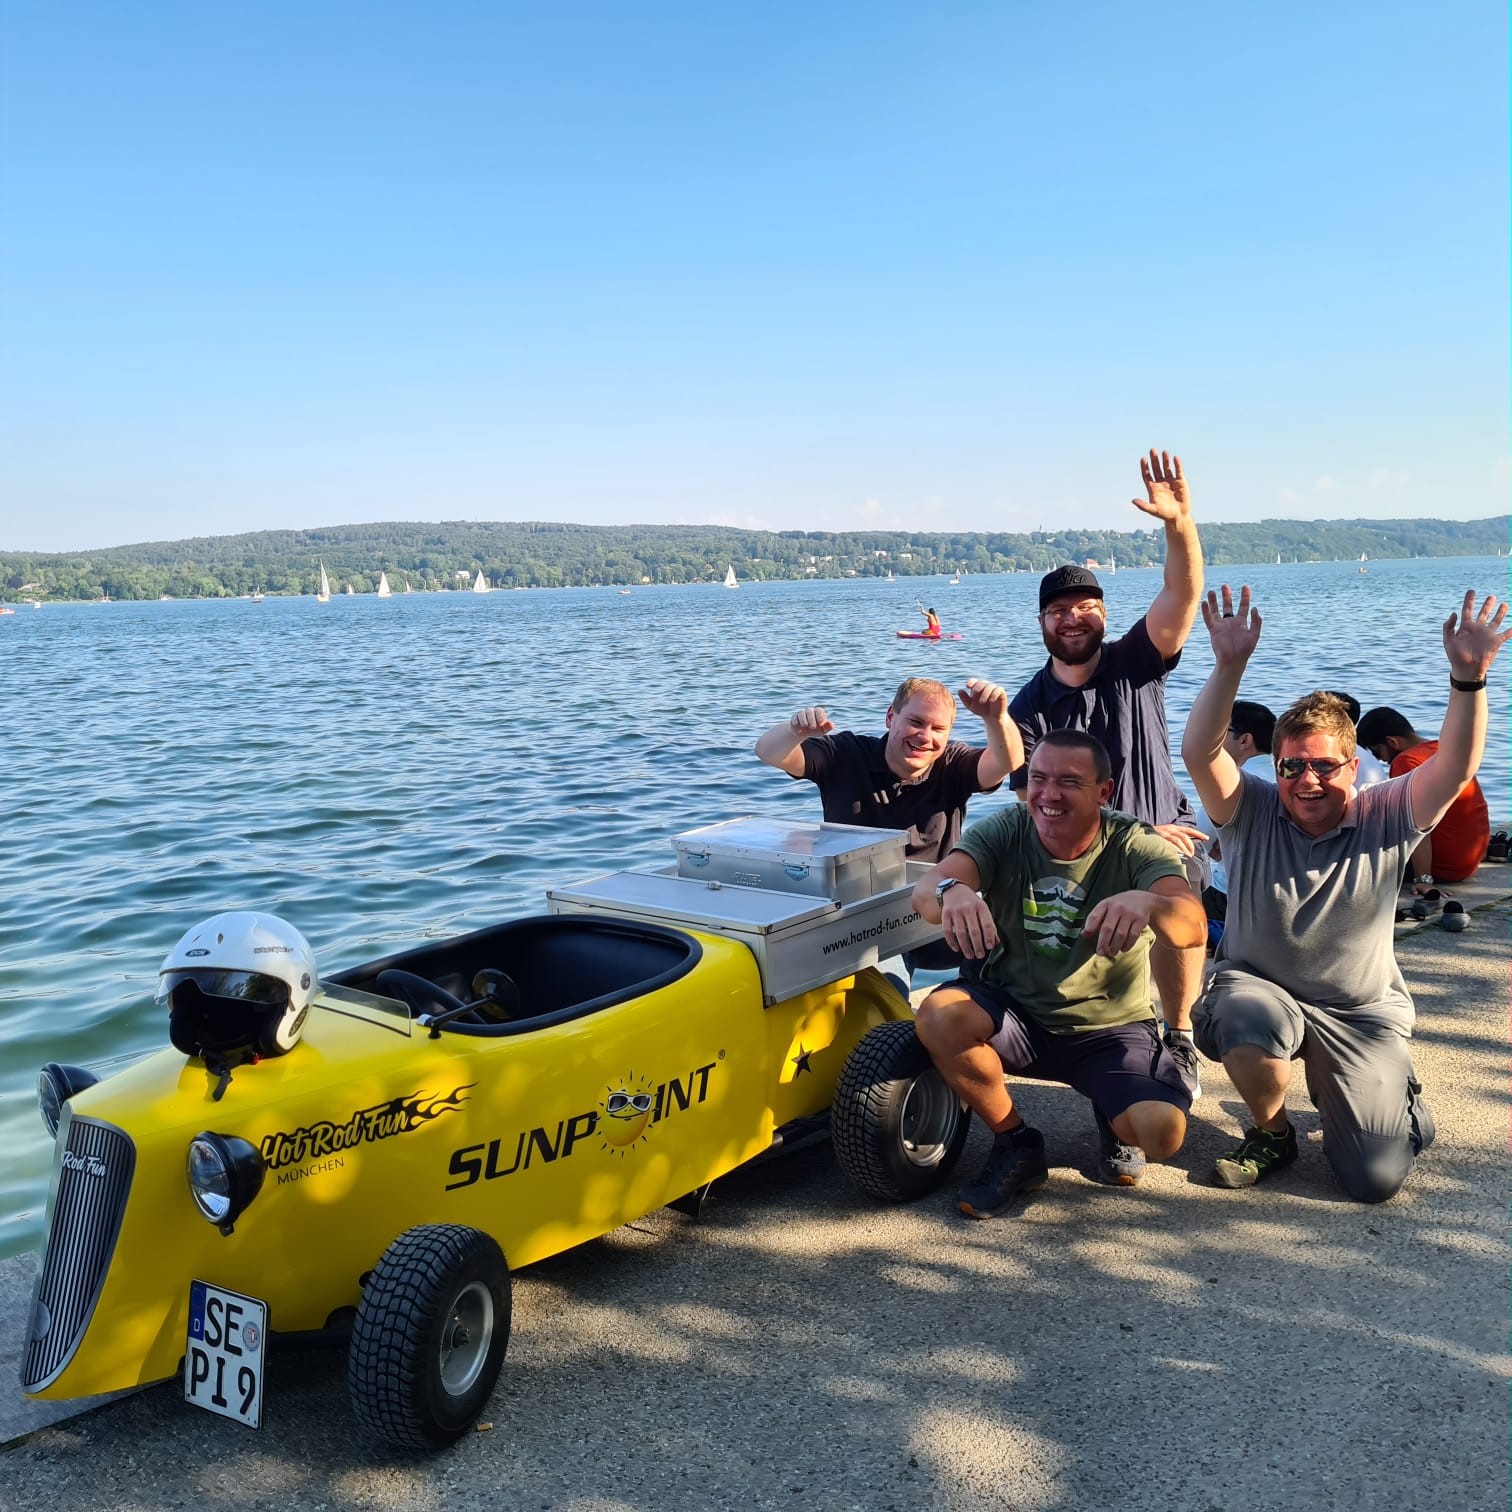 A hot rod kart on Lake Starnberg, with the group sitting next to it, waving and smiling happily.